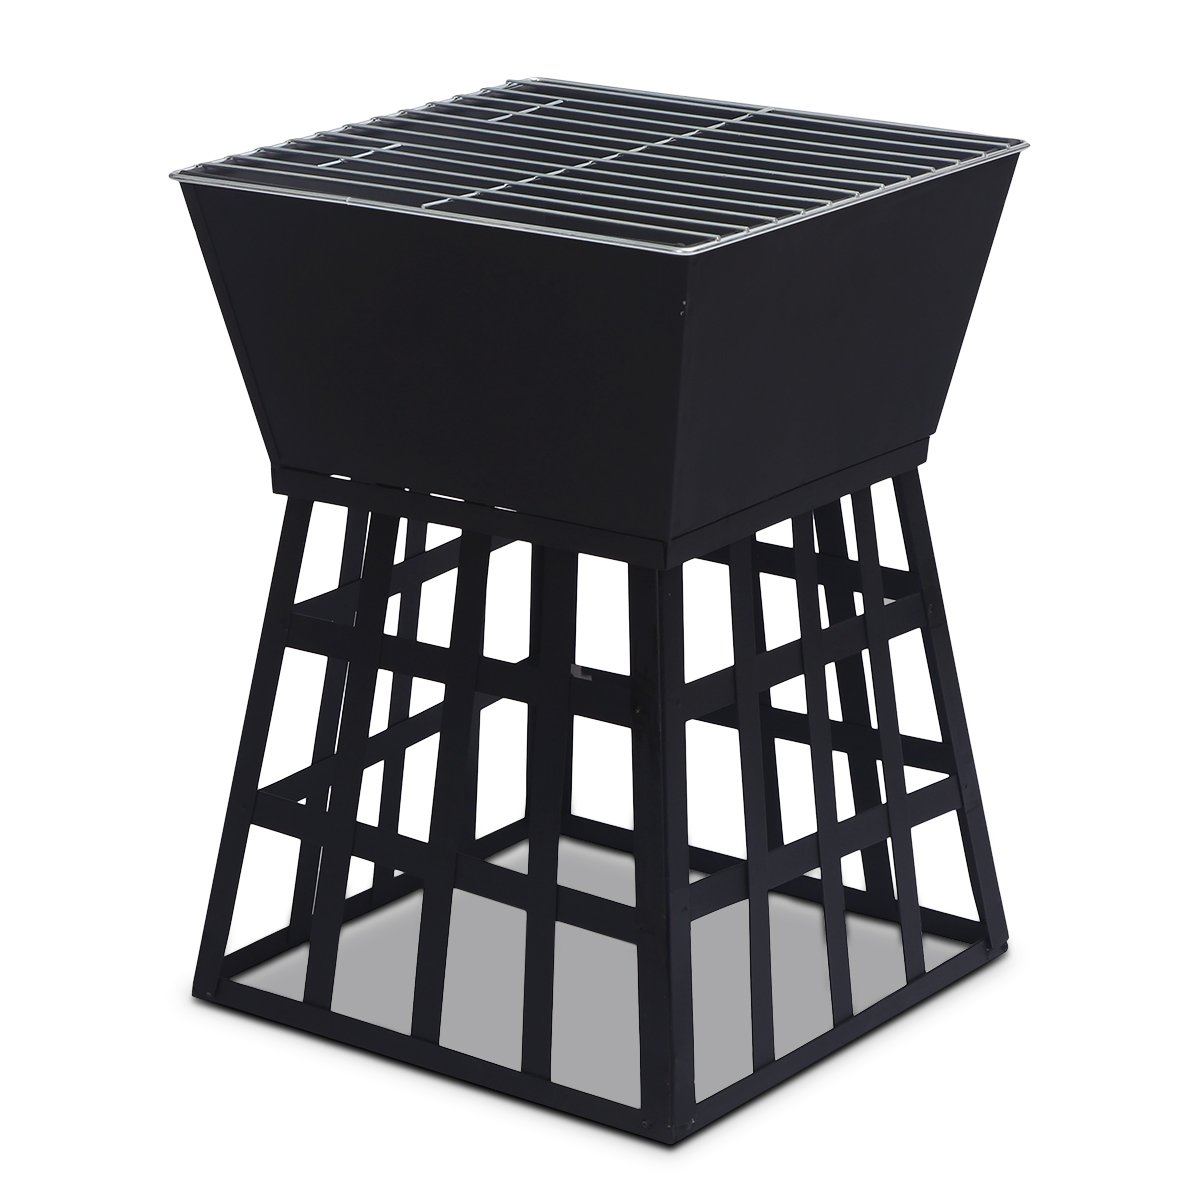 Wallaroo Outdoor Fire Pit for BBQ, Grilling, Cooking, Camping- Portable Brazier with Reversible 2